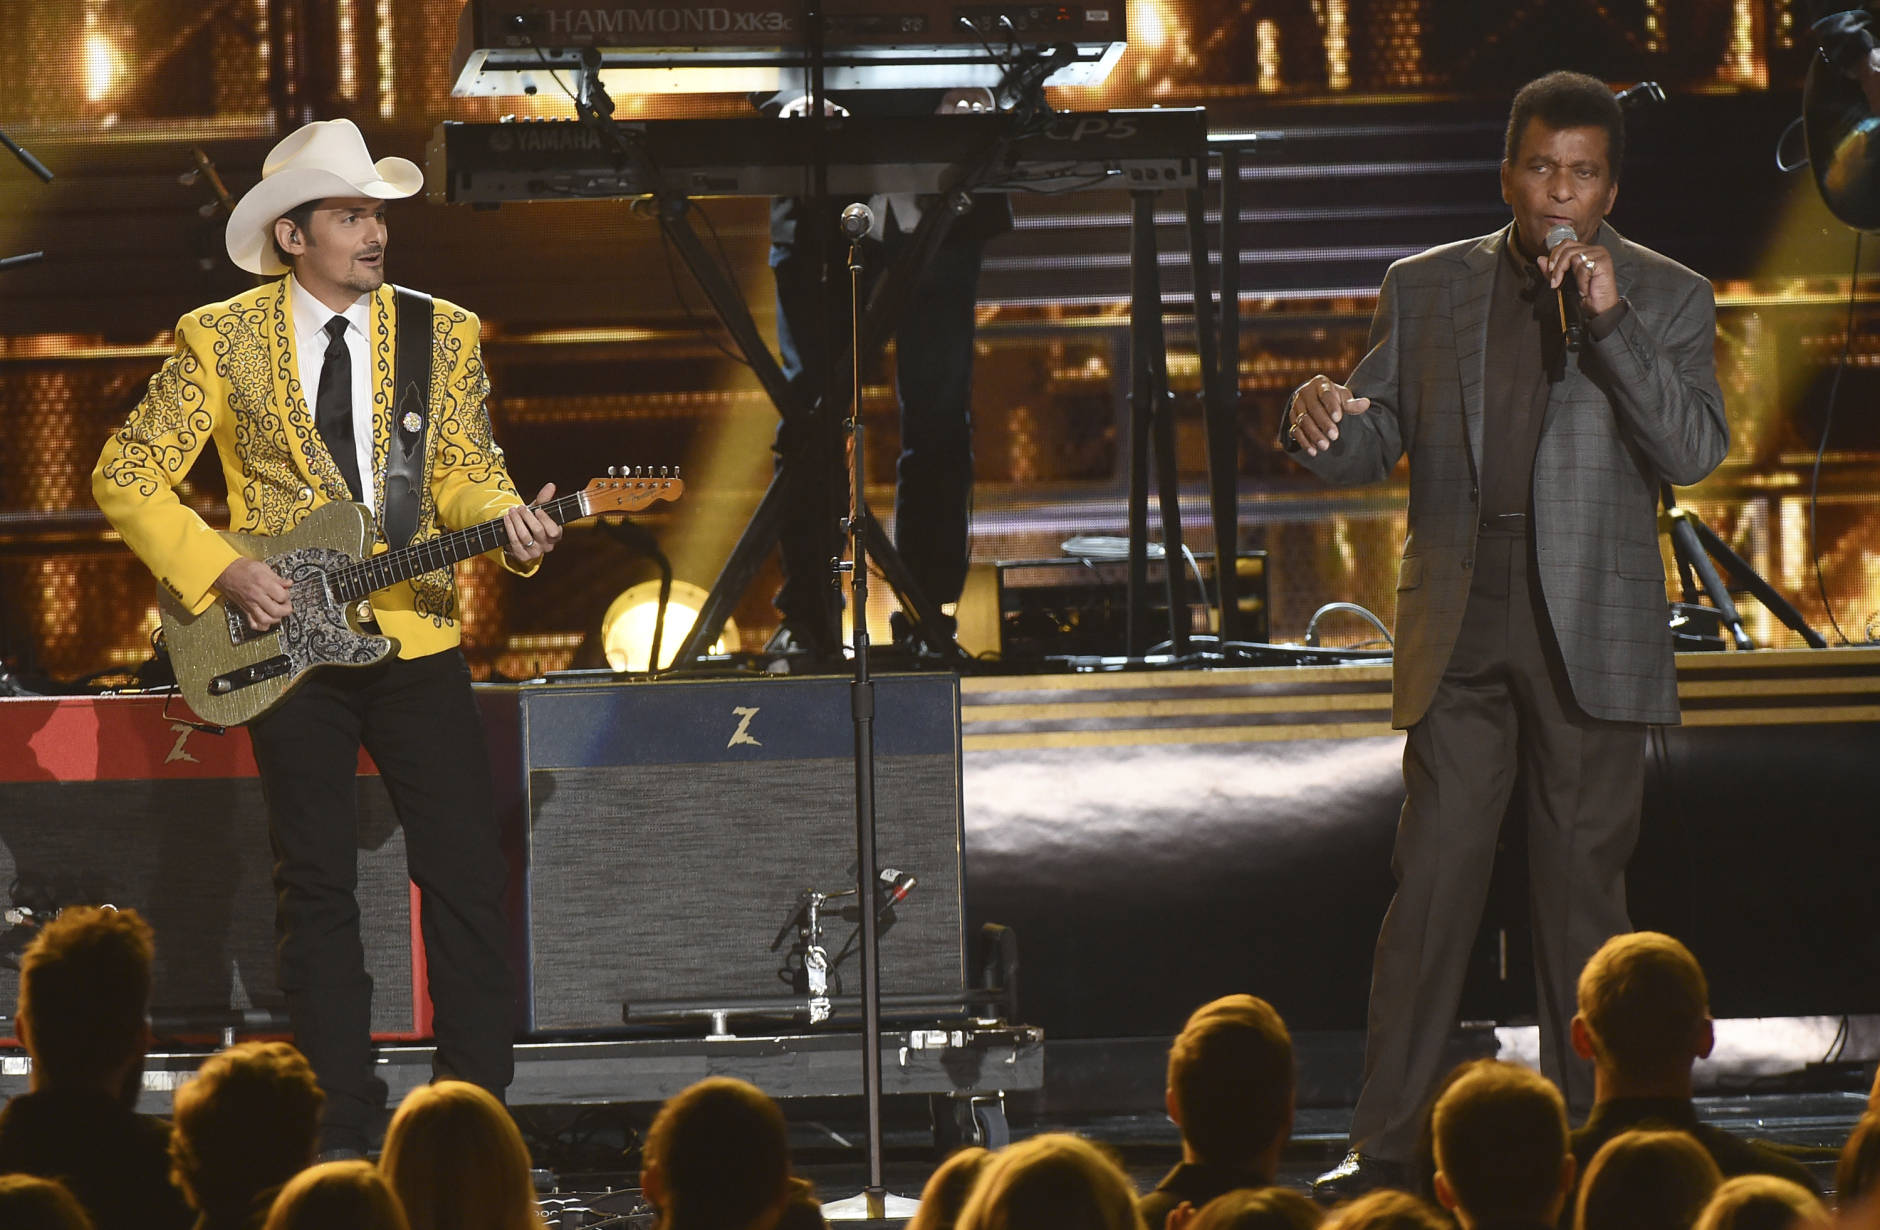 Brad Paisley, left, and Charley Pride perform "Kiss An Angel Good Morning" at the 50th annual CMA Awards at the Bridgestone Arena on Wednesday, Nov. 2, 2016, in Nashville, Tenn. (Photo by Charles Sykes/Invision/AP)